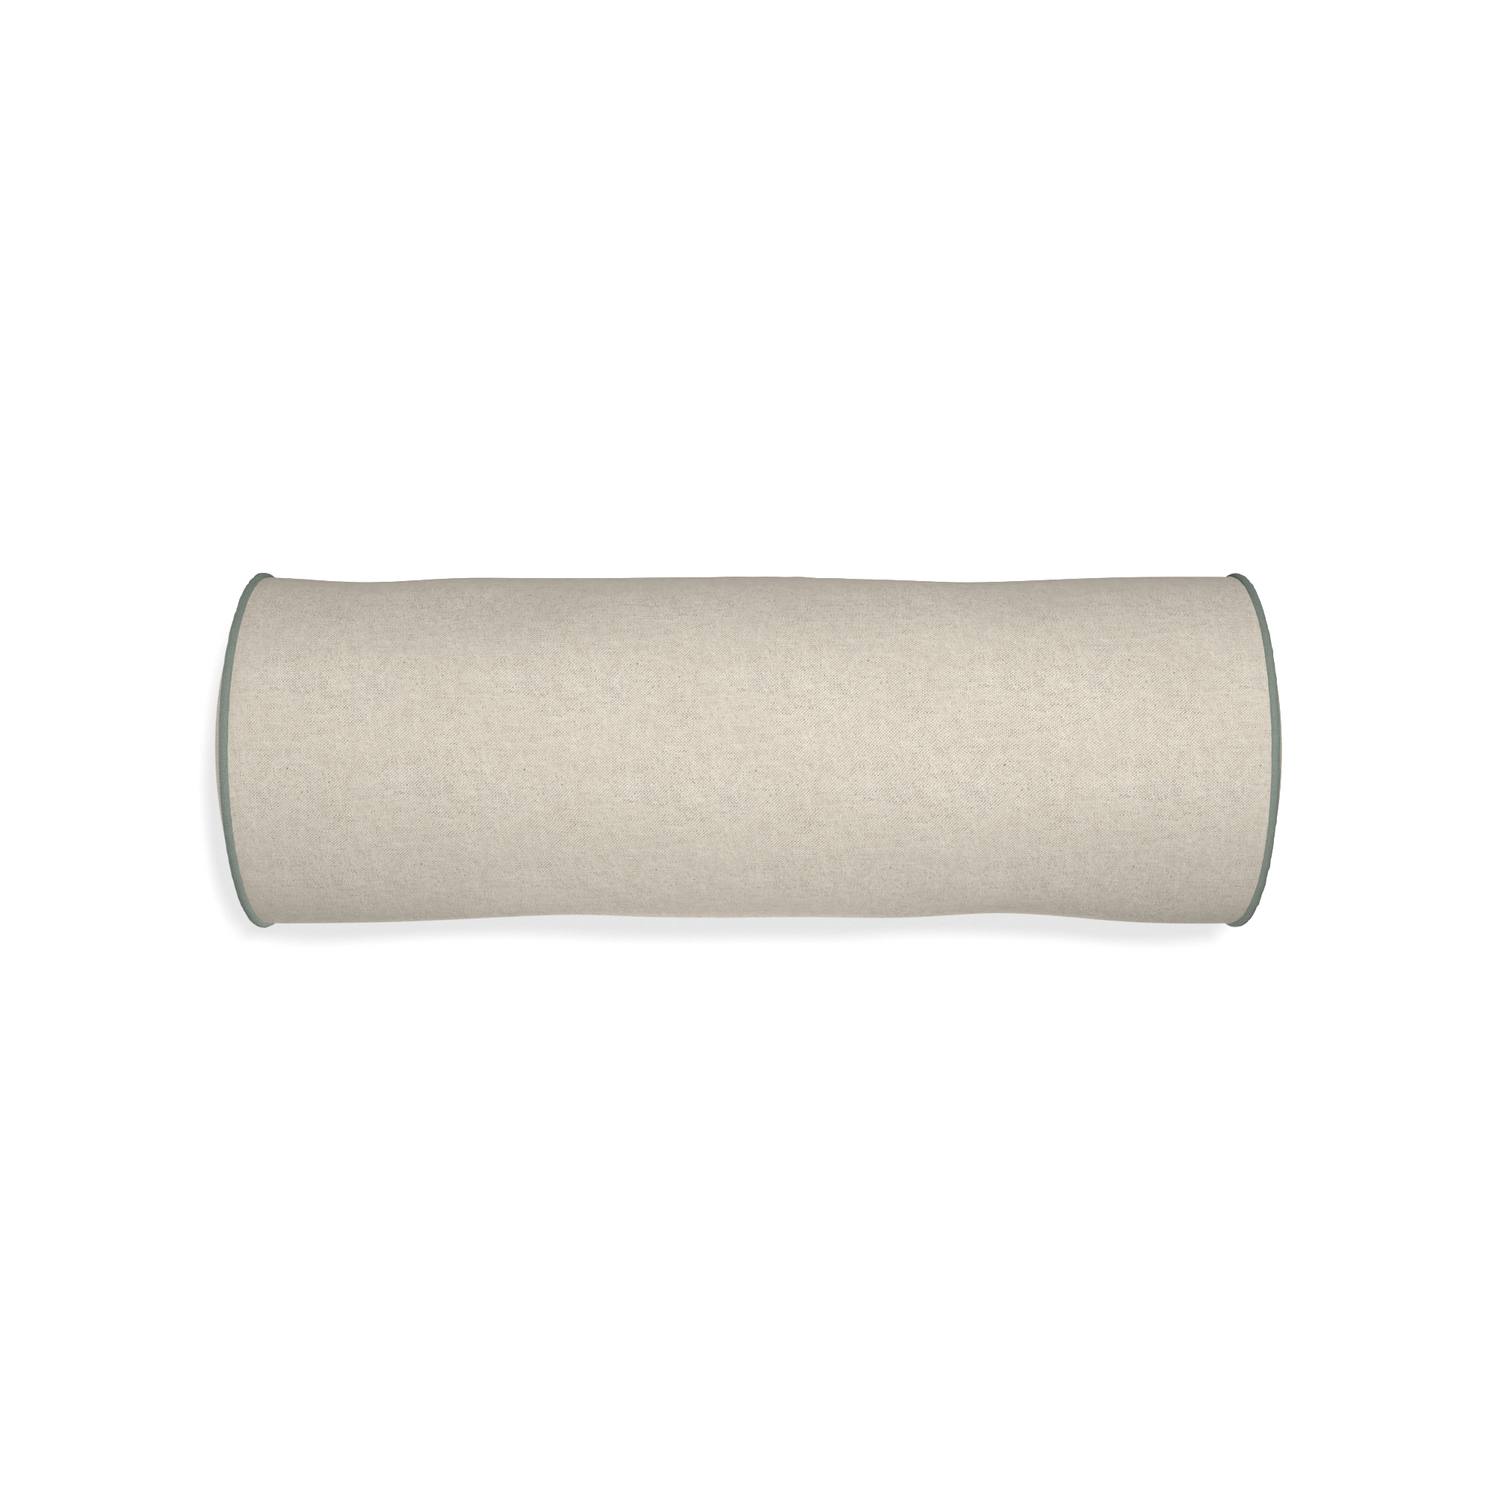 Bolster oat custom light brownpillow with sage piping on white background